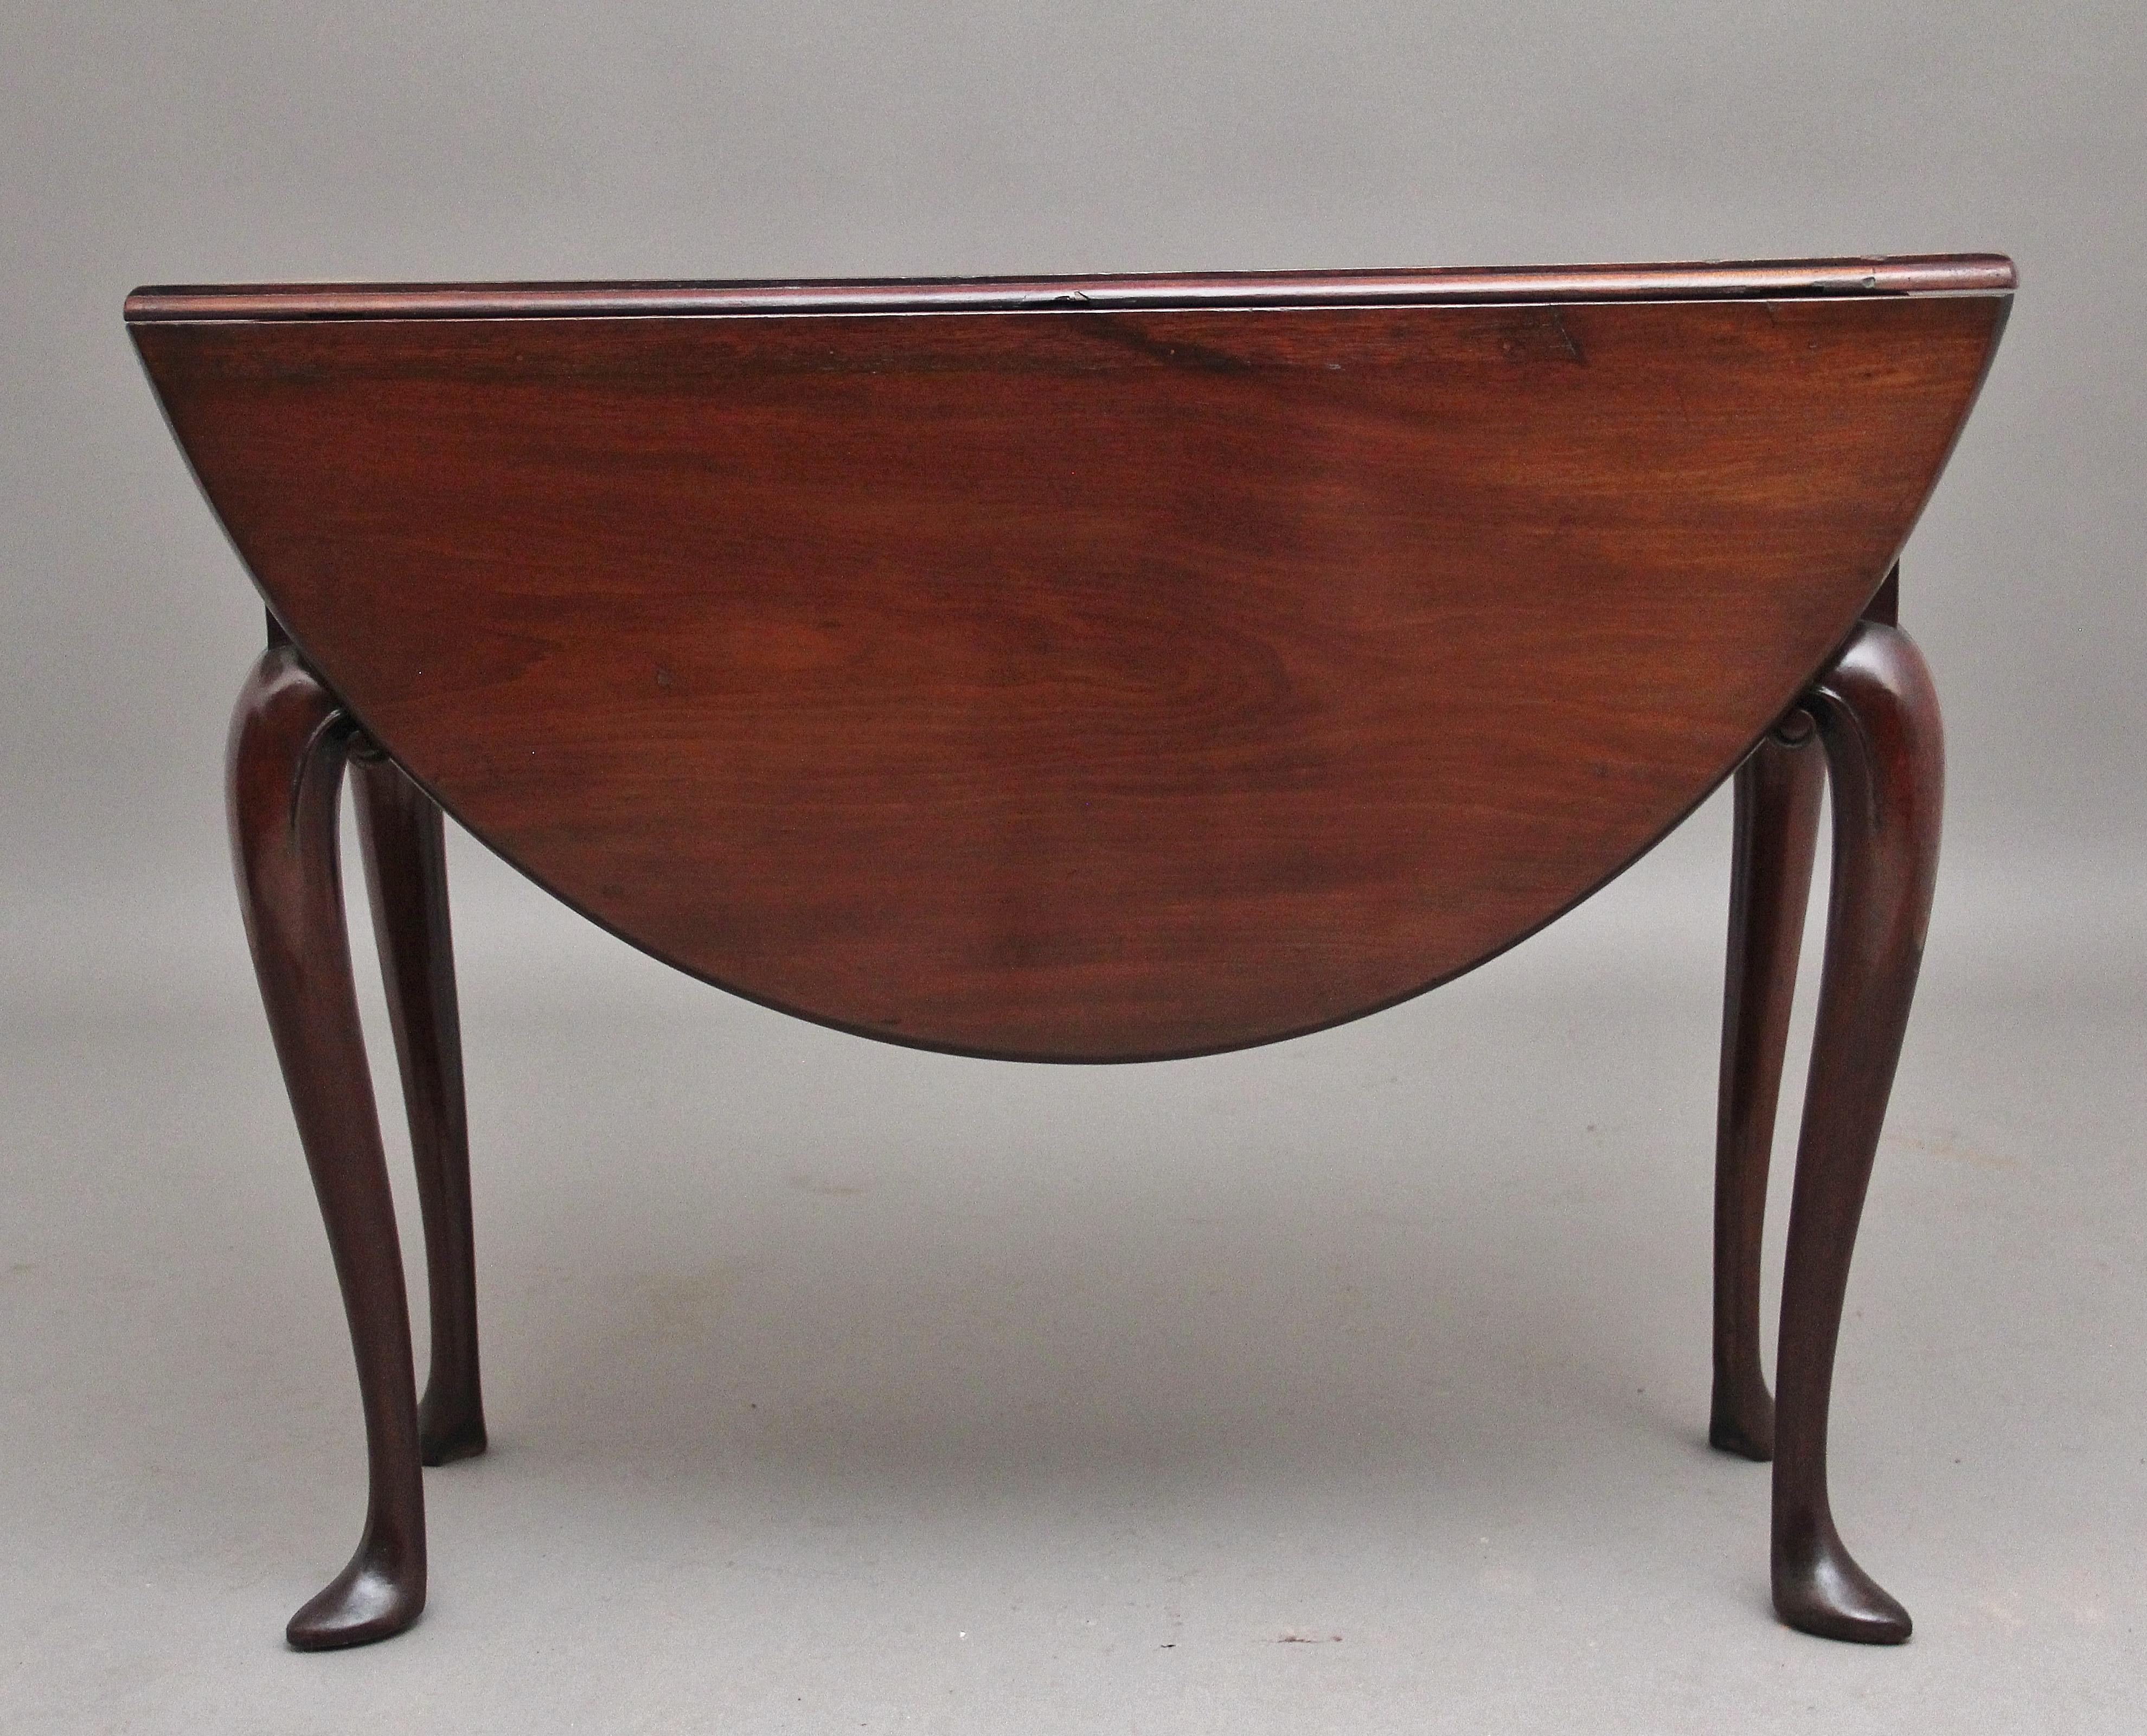 Late 18th Century 18th Century Mahogany Drop Leaf Table from the Georgian Period